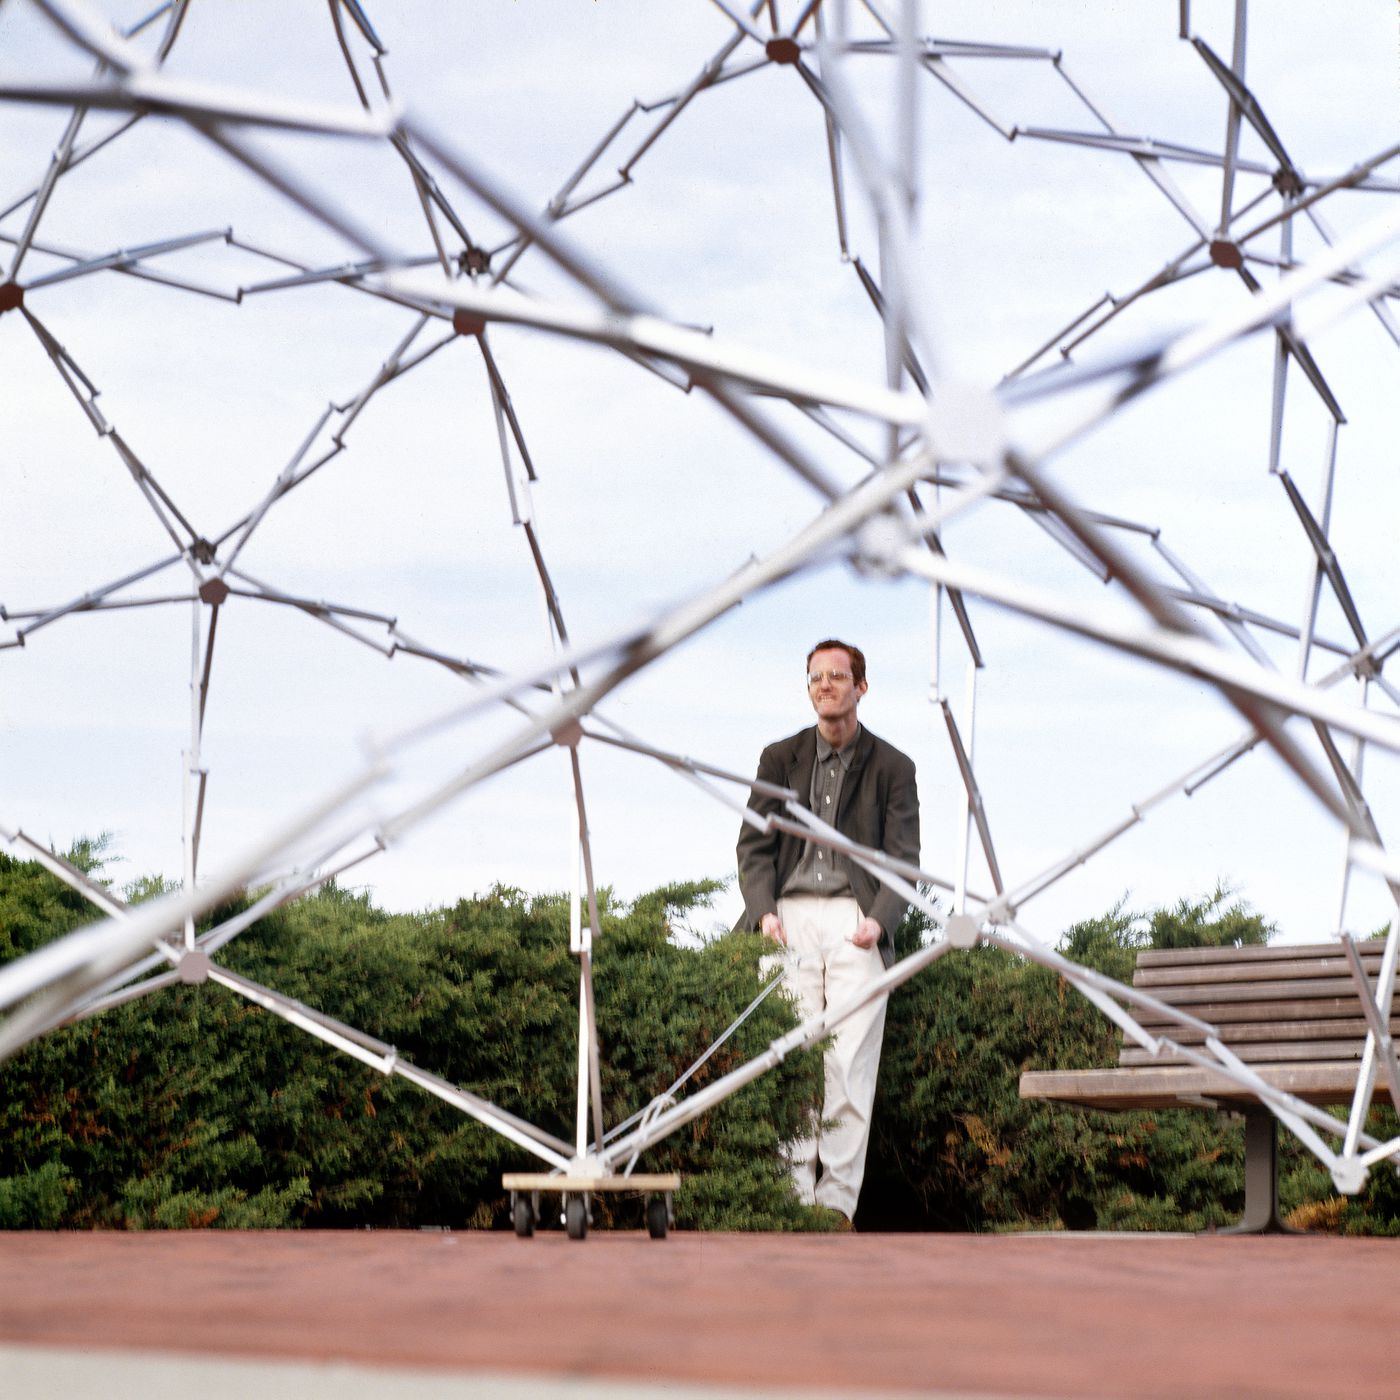 View of Chuck Hoberman through the Expanding Geodesic Dome, Liberty State Park, Jersey City, New Jersey.